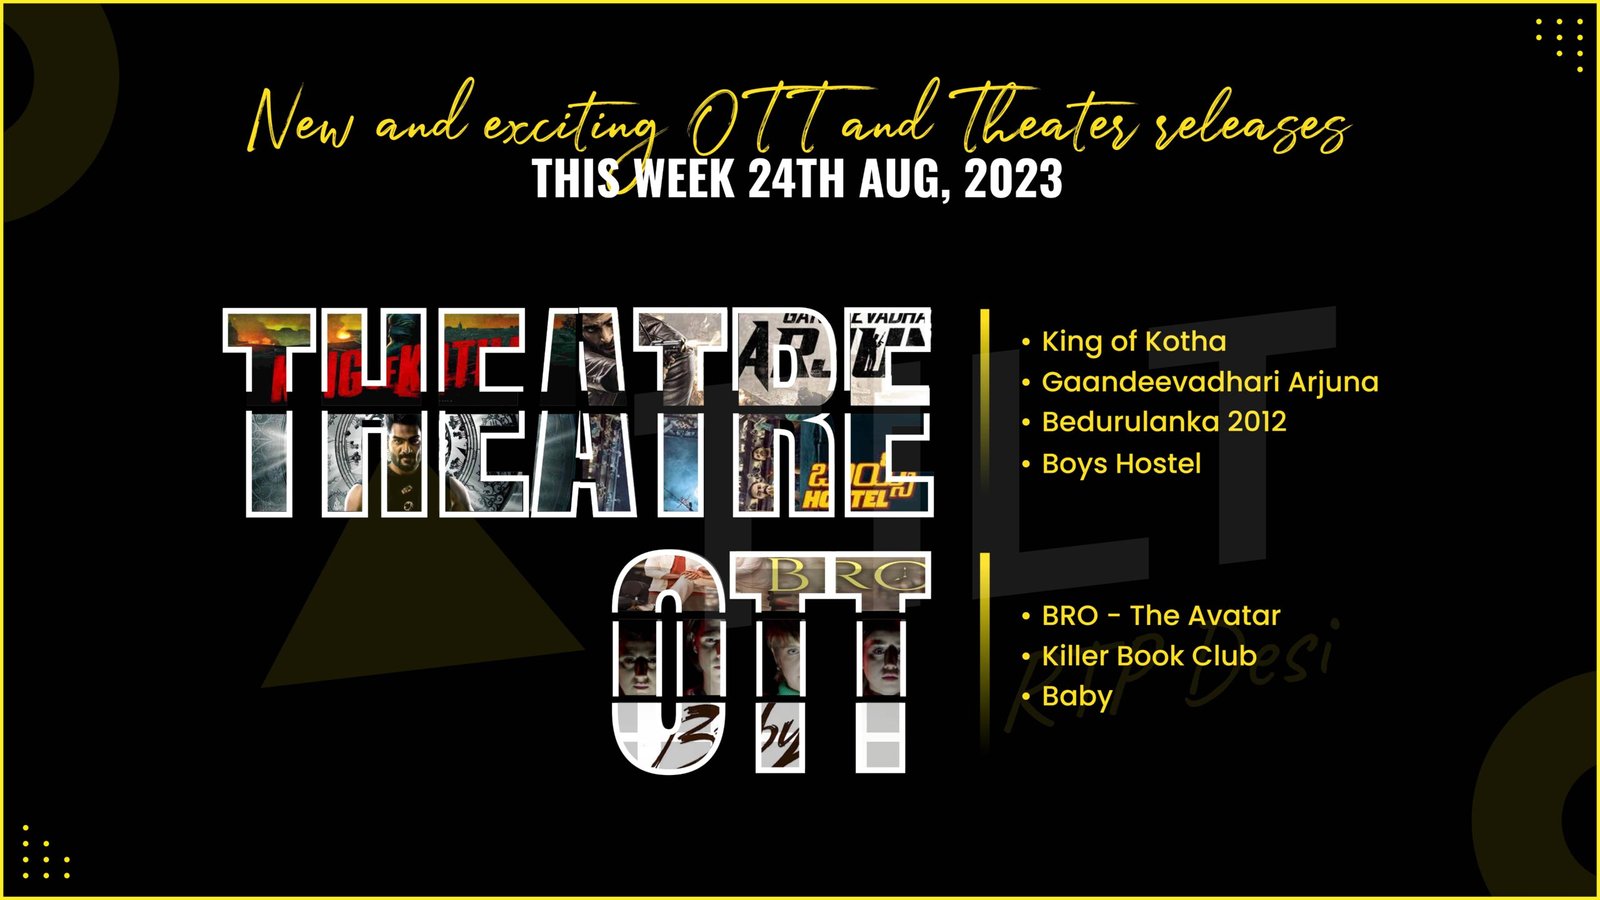 New Theatre and OTT Releases This Week, 24th Aug 2023 -Triangle Tilt